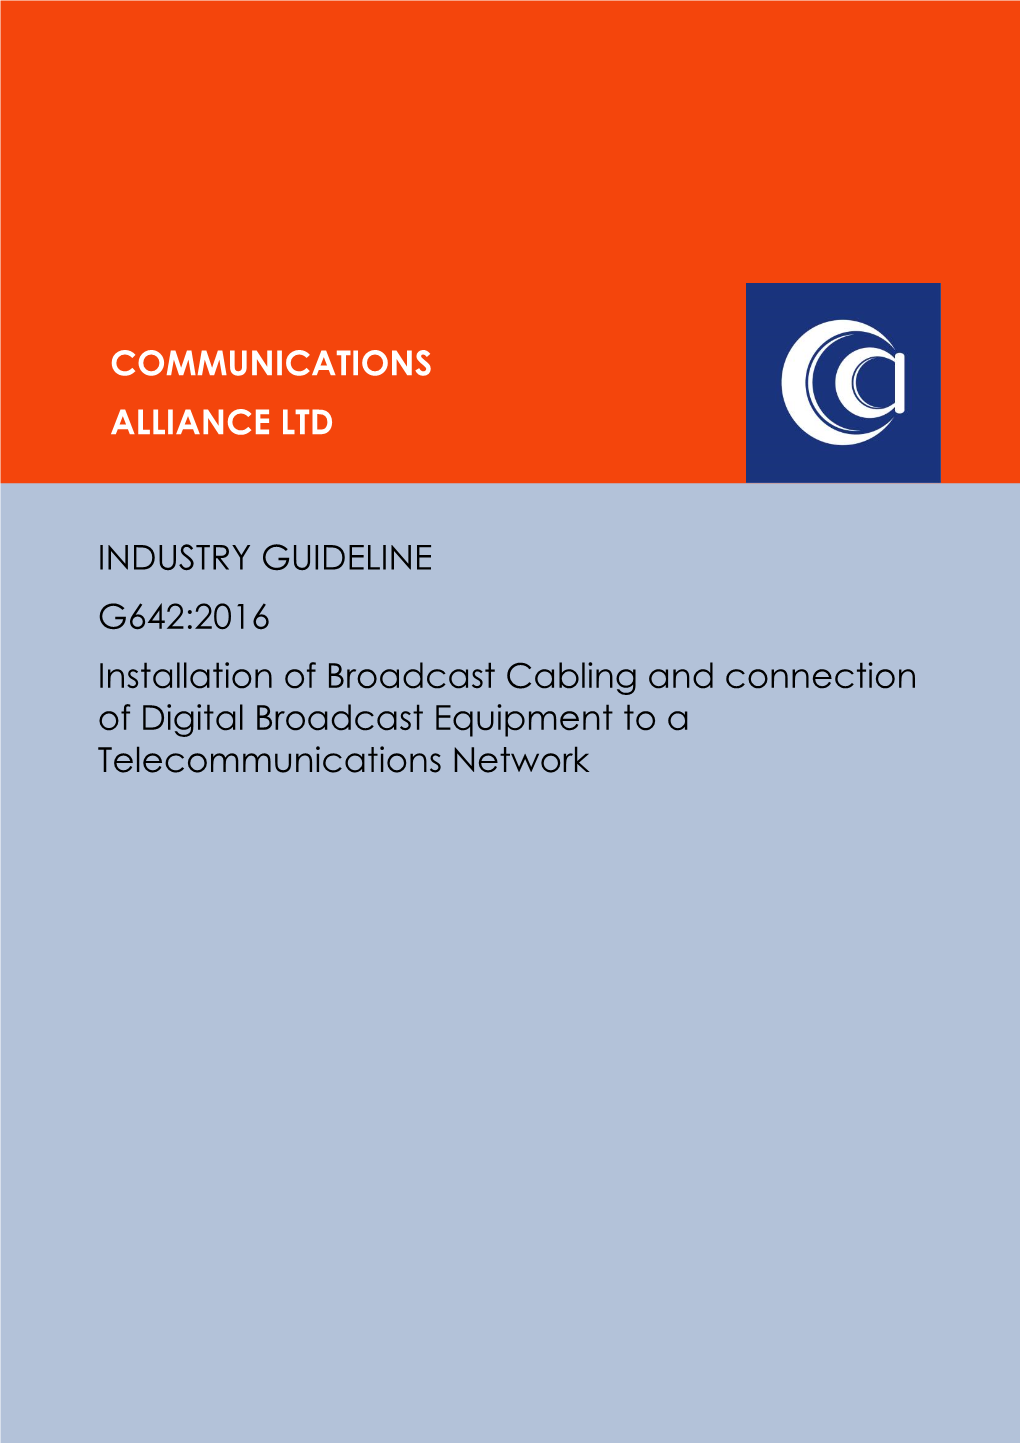 INDUSTRY GUIDELINE G642:2016 Installation of Broadcast Cabling and Connection of Digital Broadcast Equipment to a Telecommunications Network